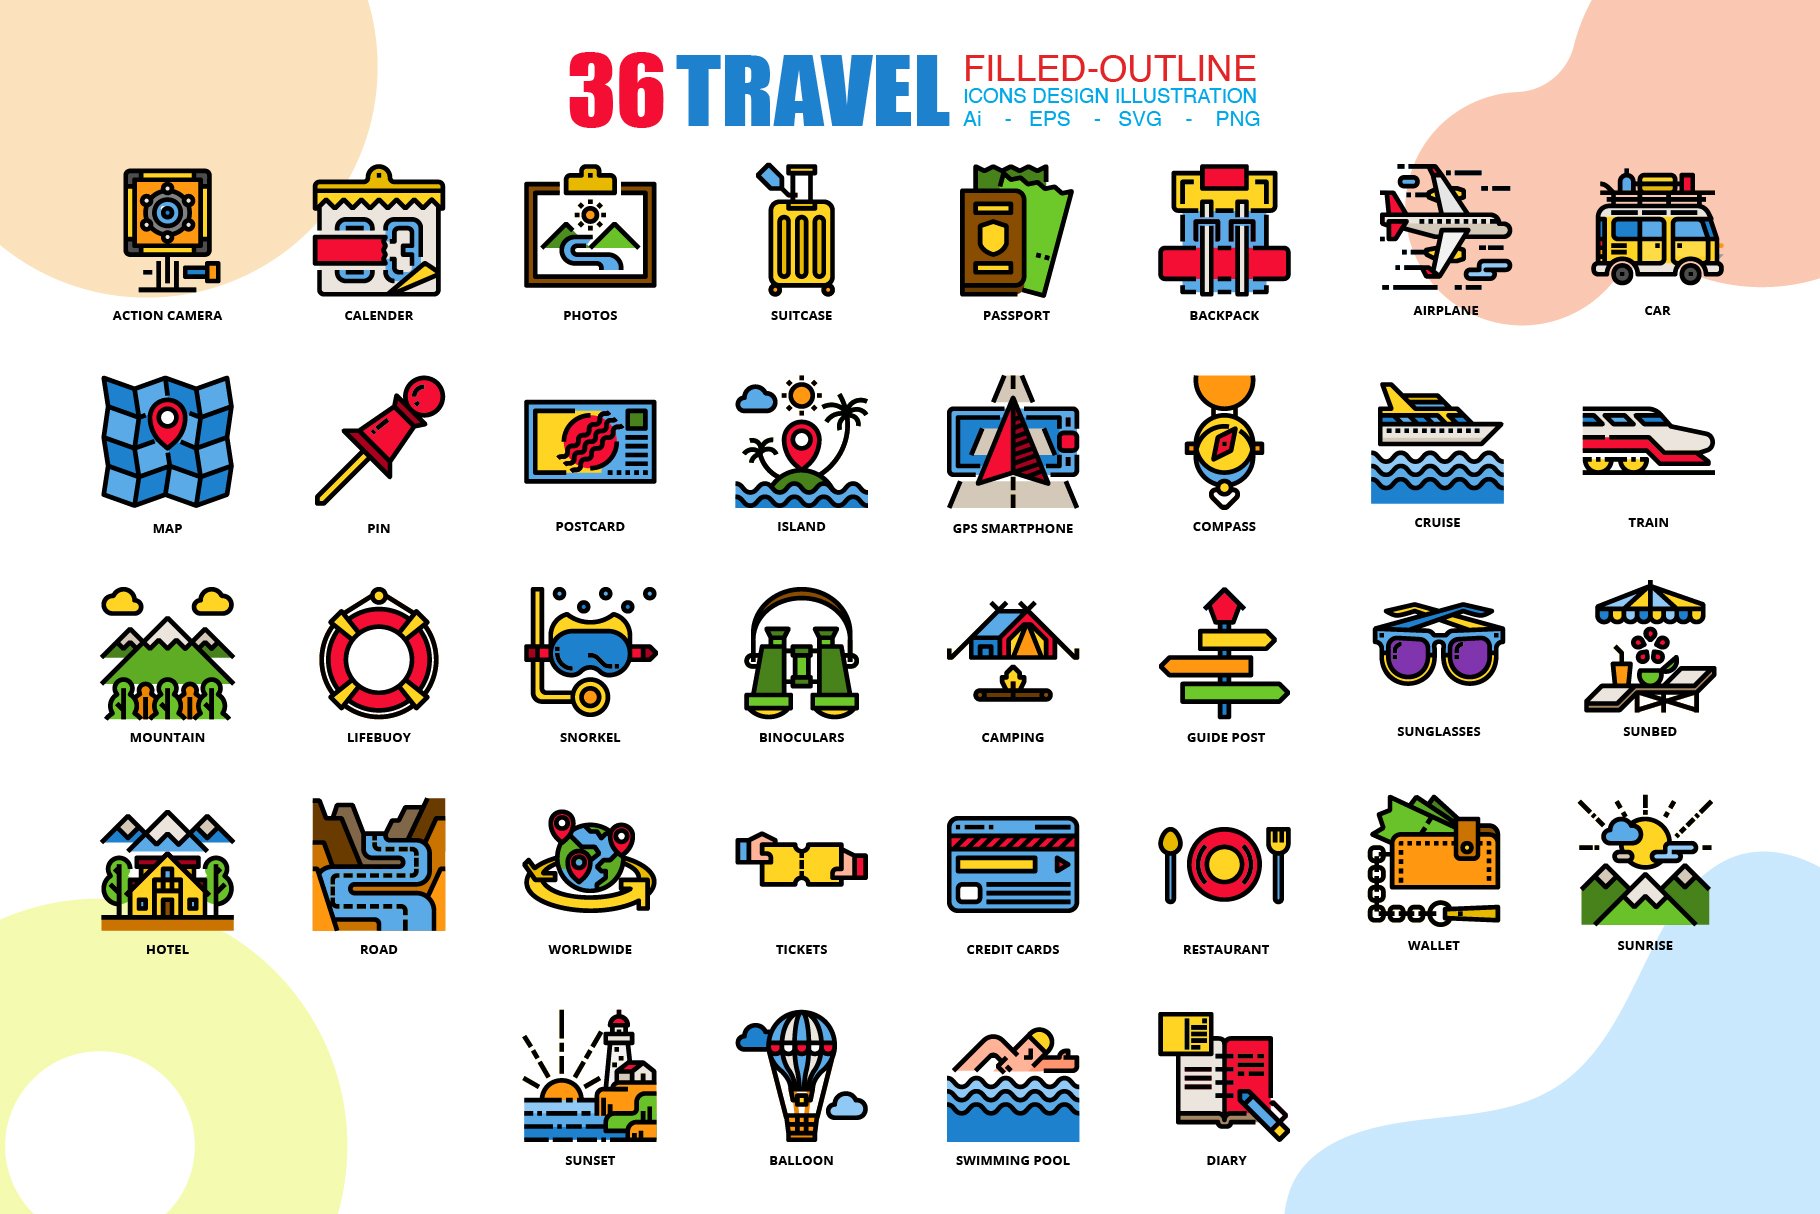 36 Travel icons set x 3 style cover image.